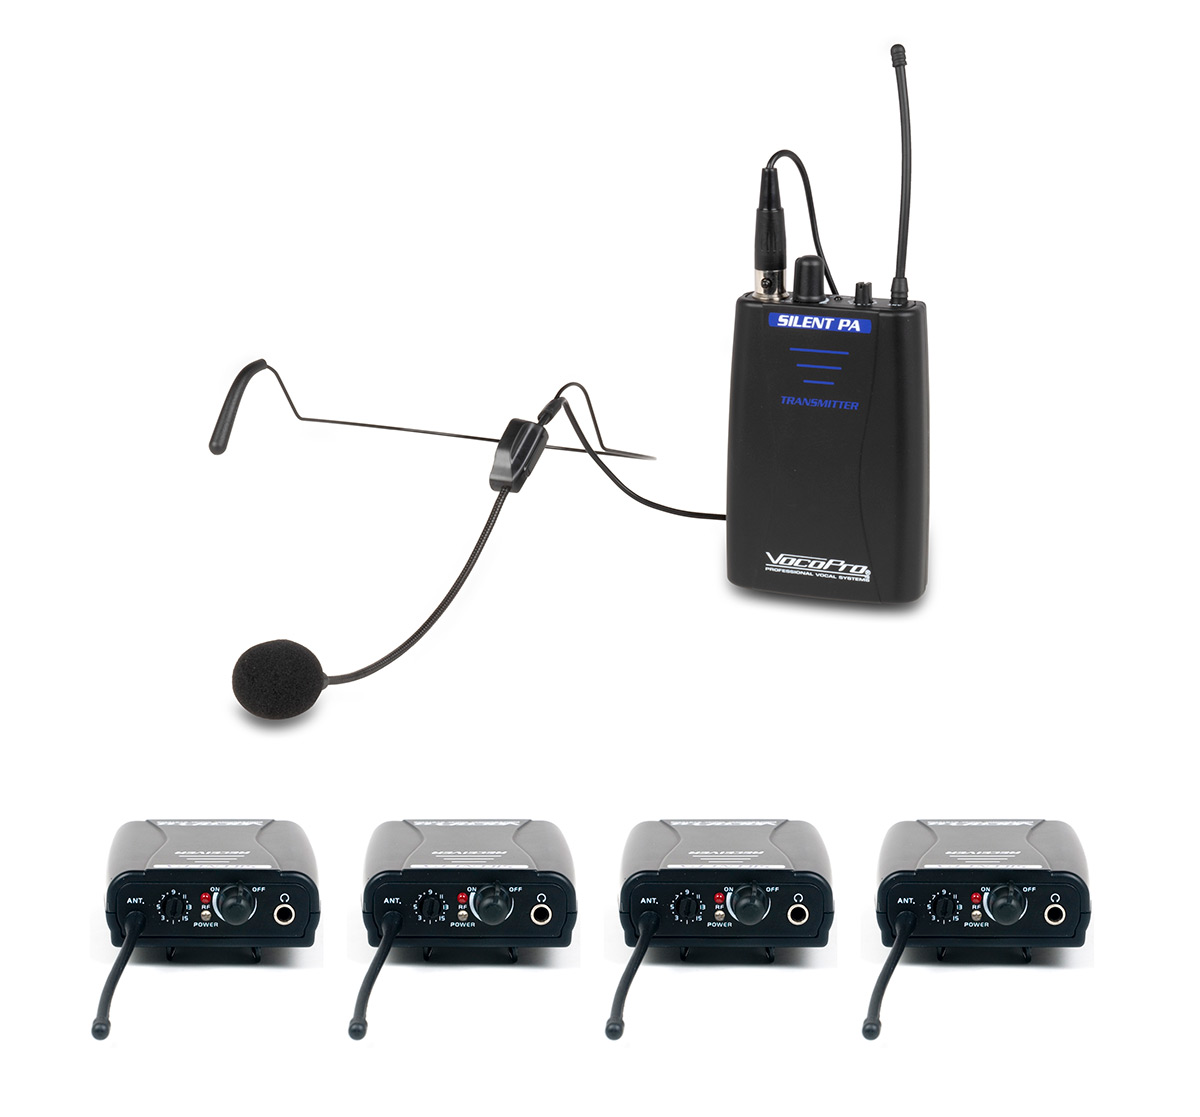 VocoPro One way communication system for TV and film production